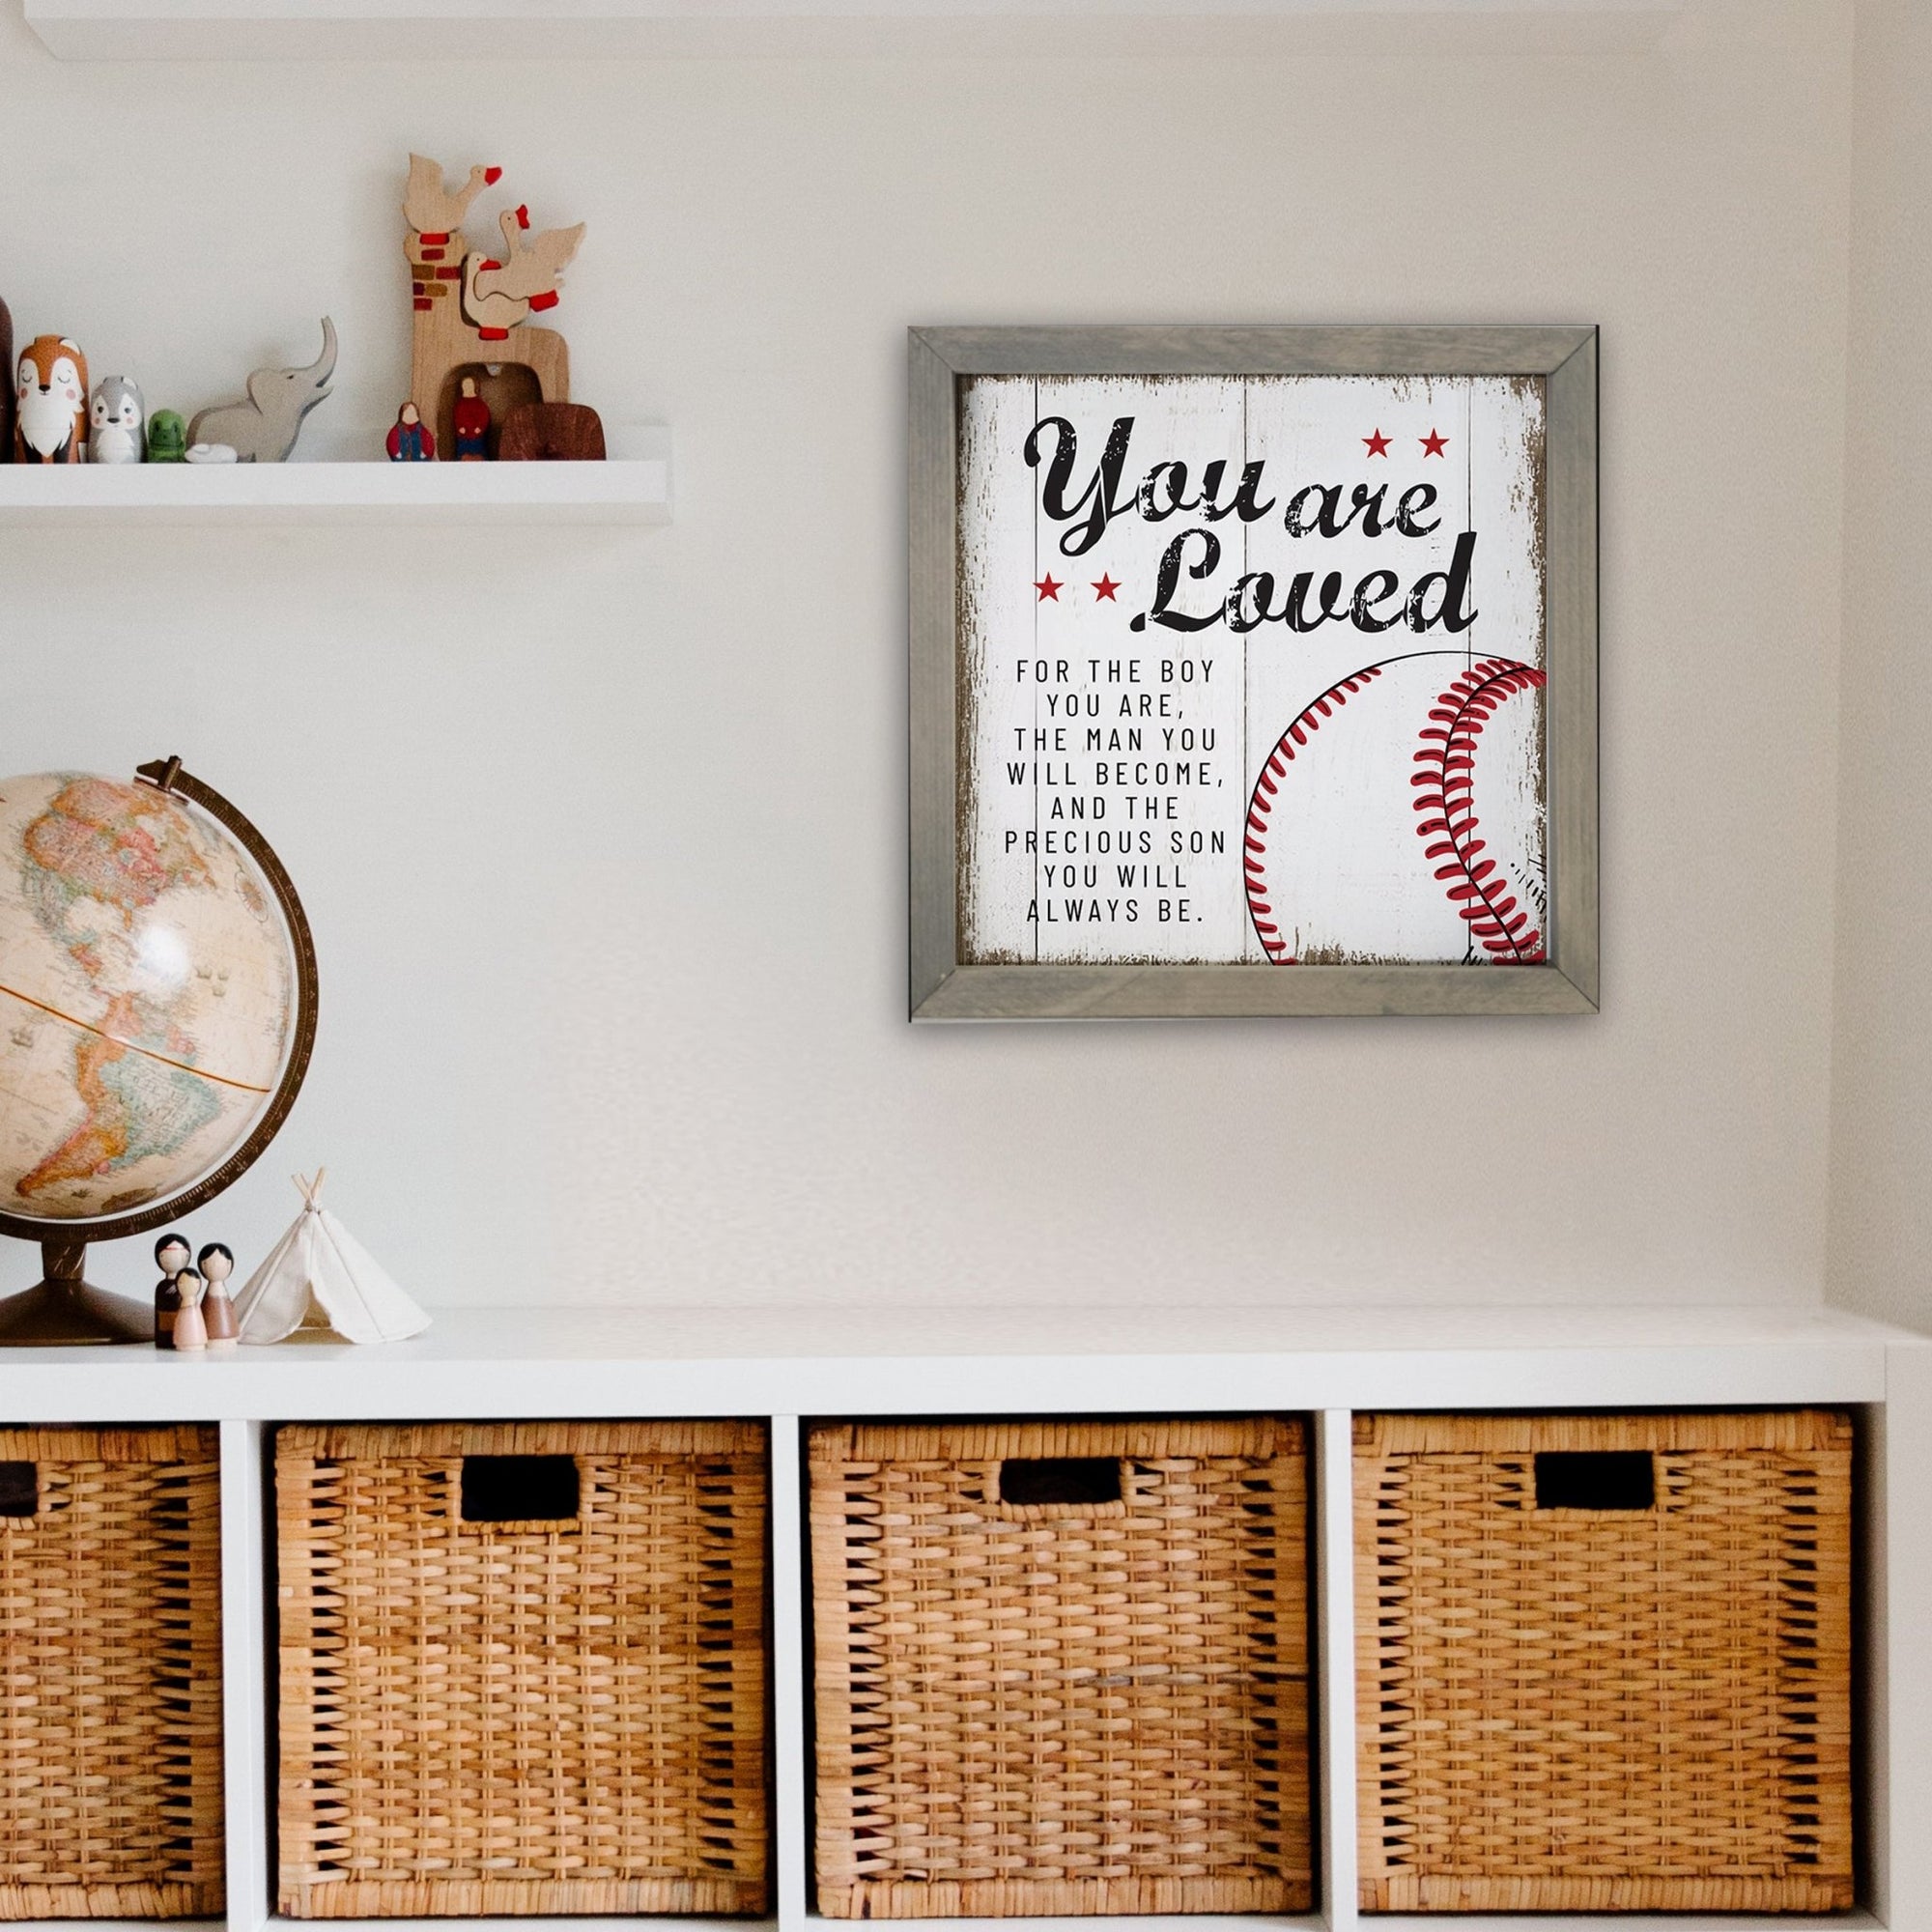 Elegant Baseball Framed Shadow Box Shelf Décor With Inspiring Bible Verses - You Are Loved - LifeSong Milestones